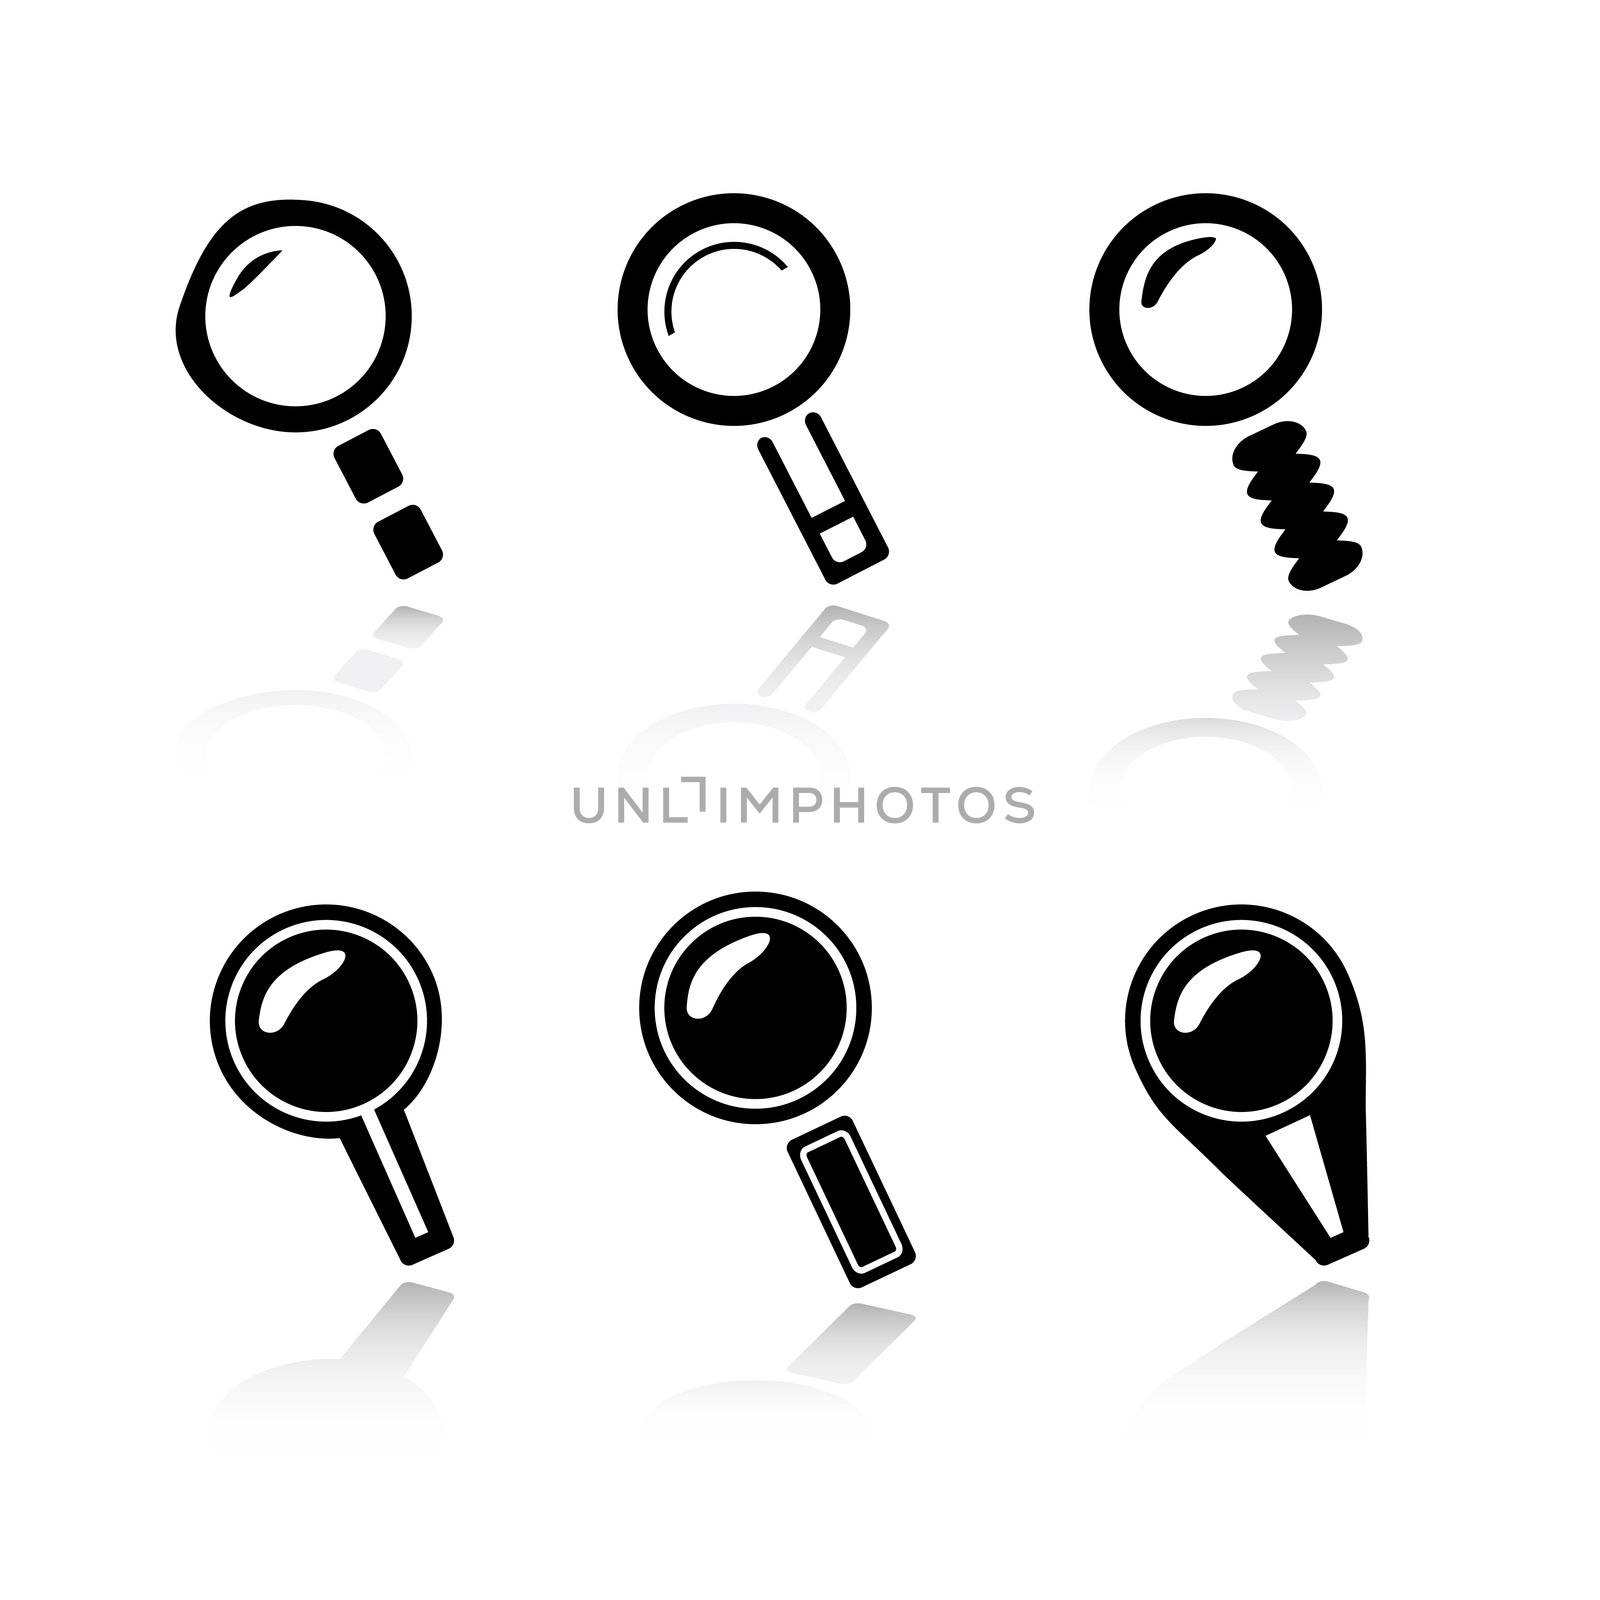 Set of 6 magnifier / search icon variations